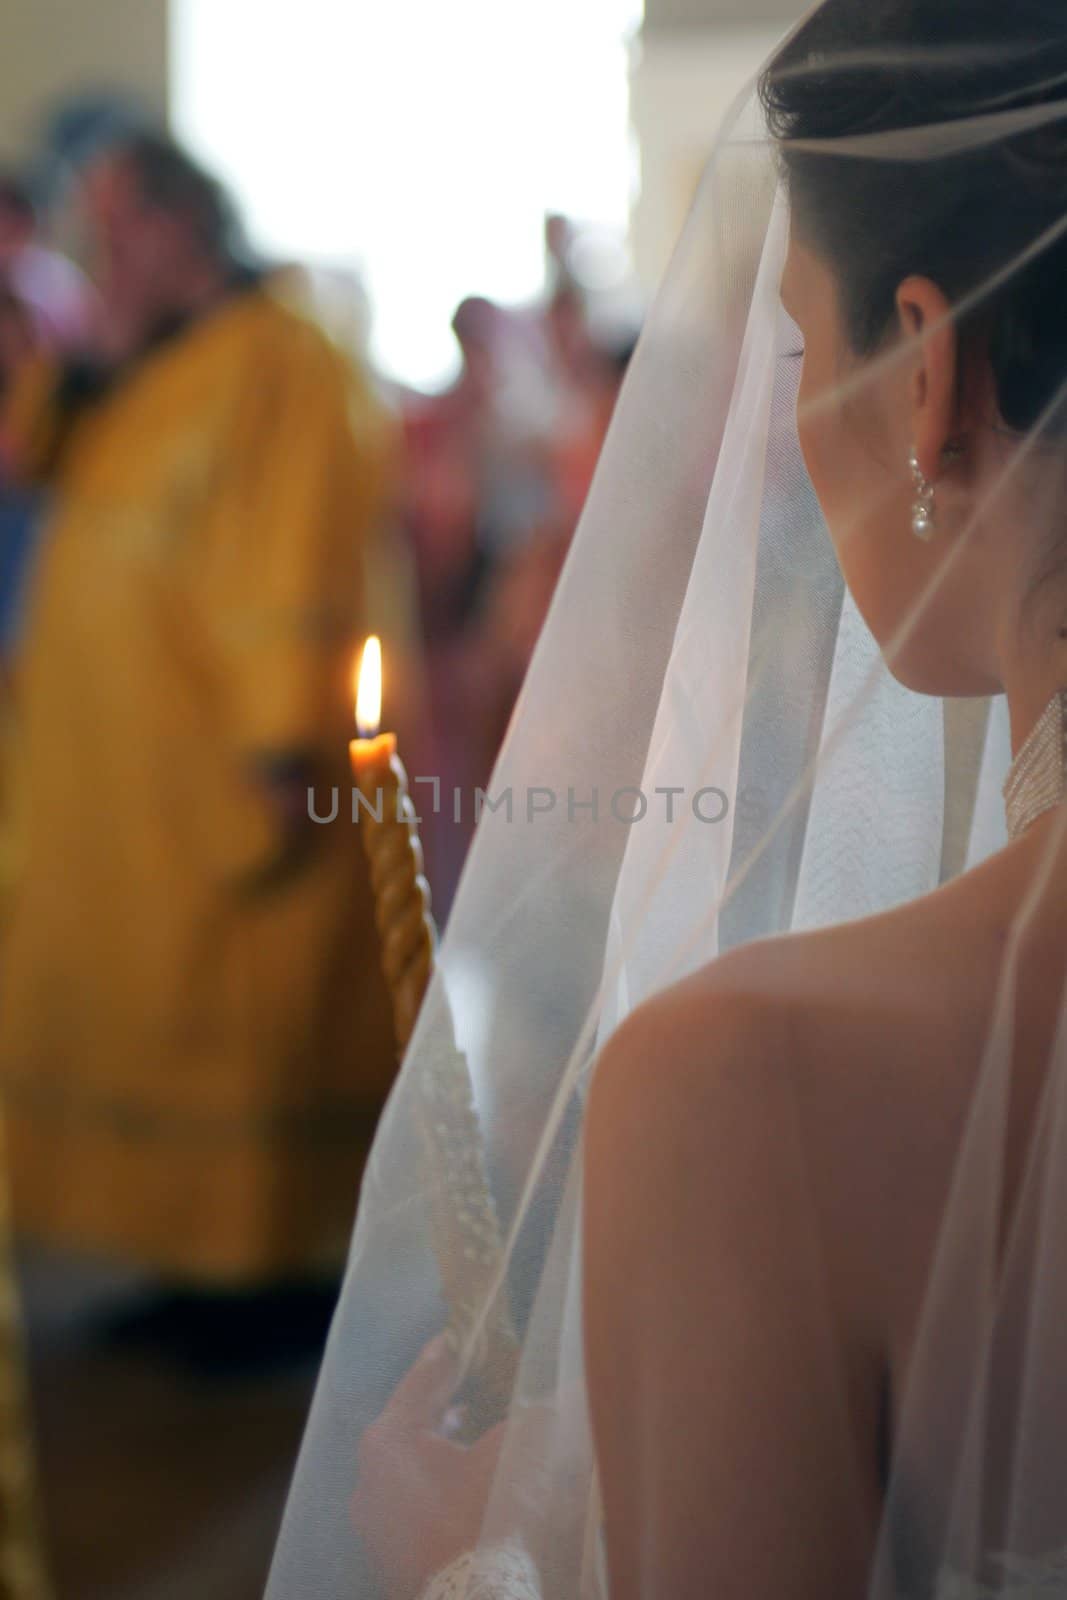 Rear view of bride wearing white wedding dress and holding lighted candle walking behind orthodox priest.